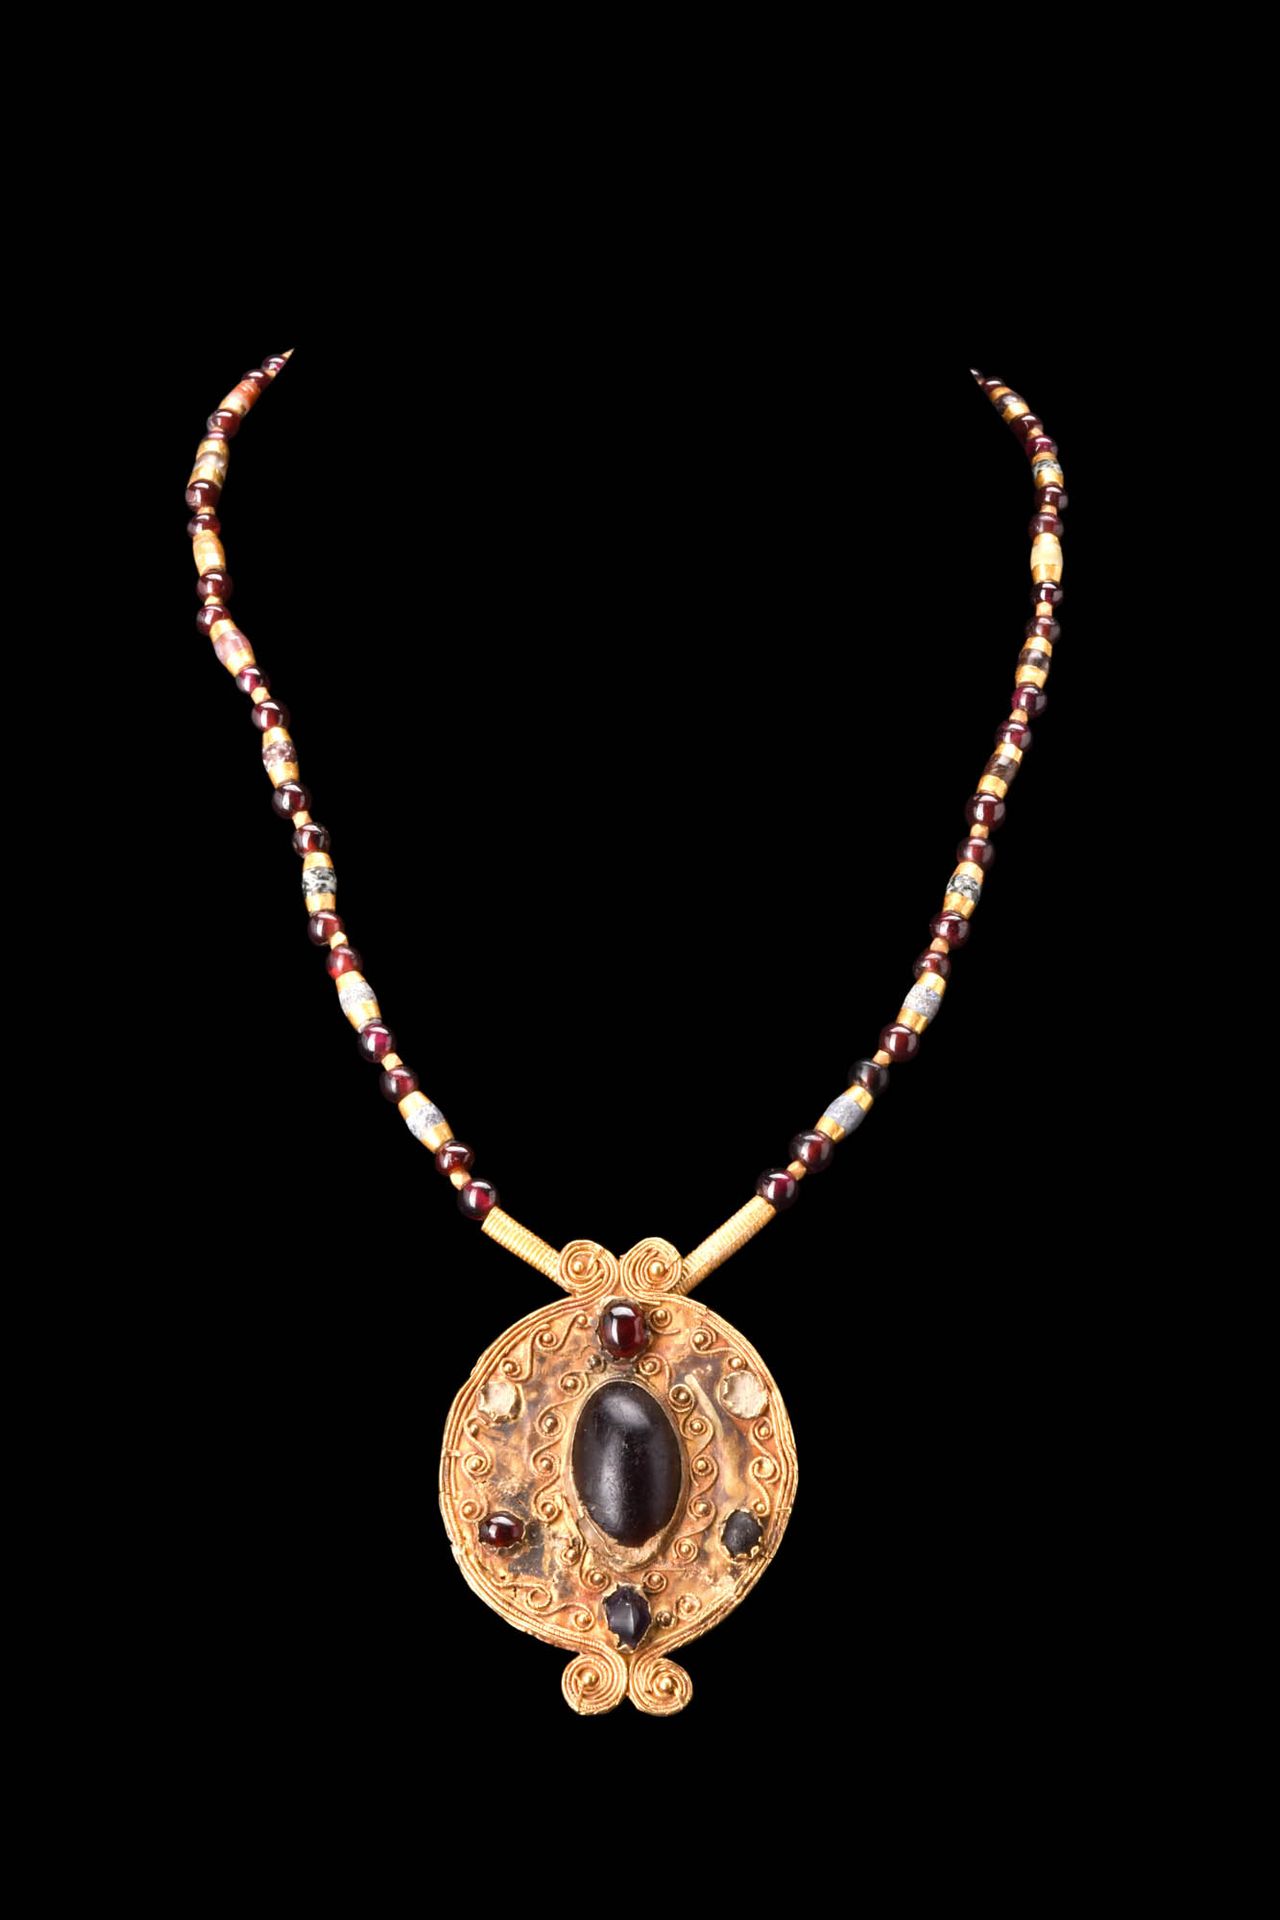 HELLENISTIC GOLD PENDANT AND NECKLACE Ca. A.C. 400 - 300.
Colgante y collar hele&hellip;